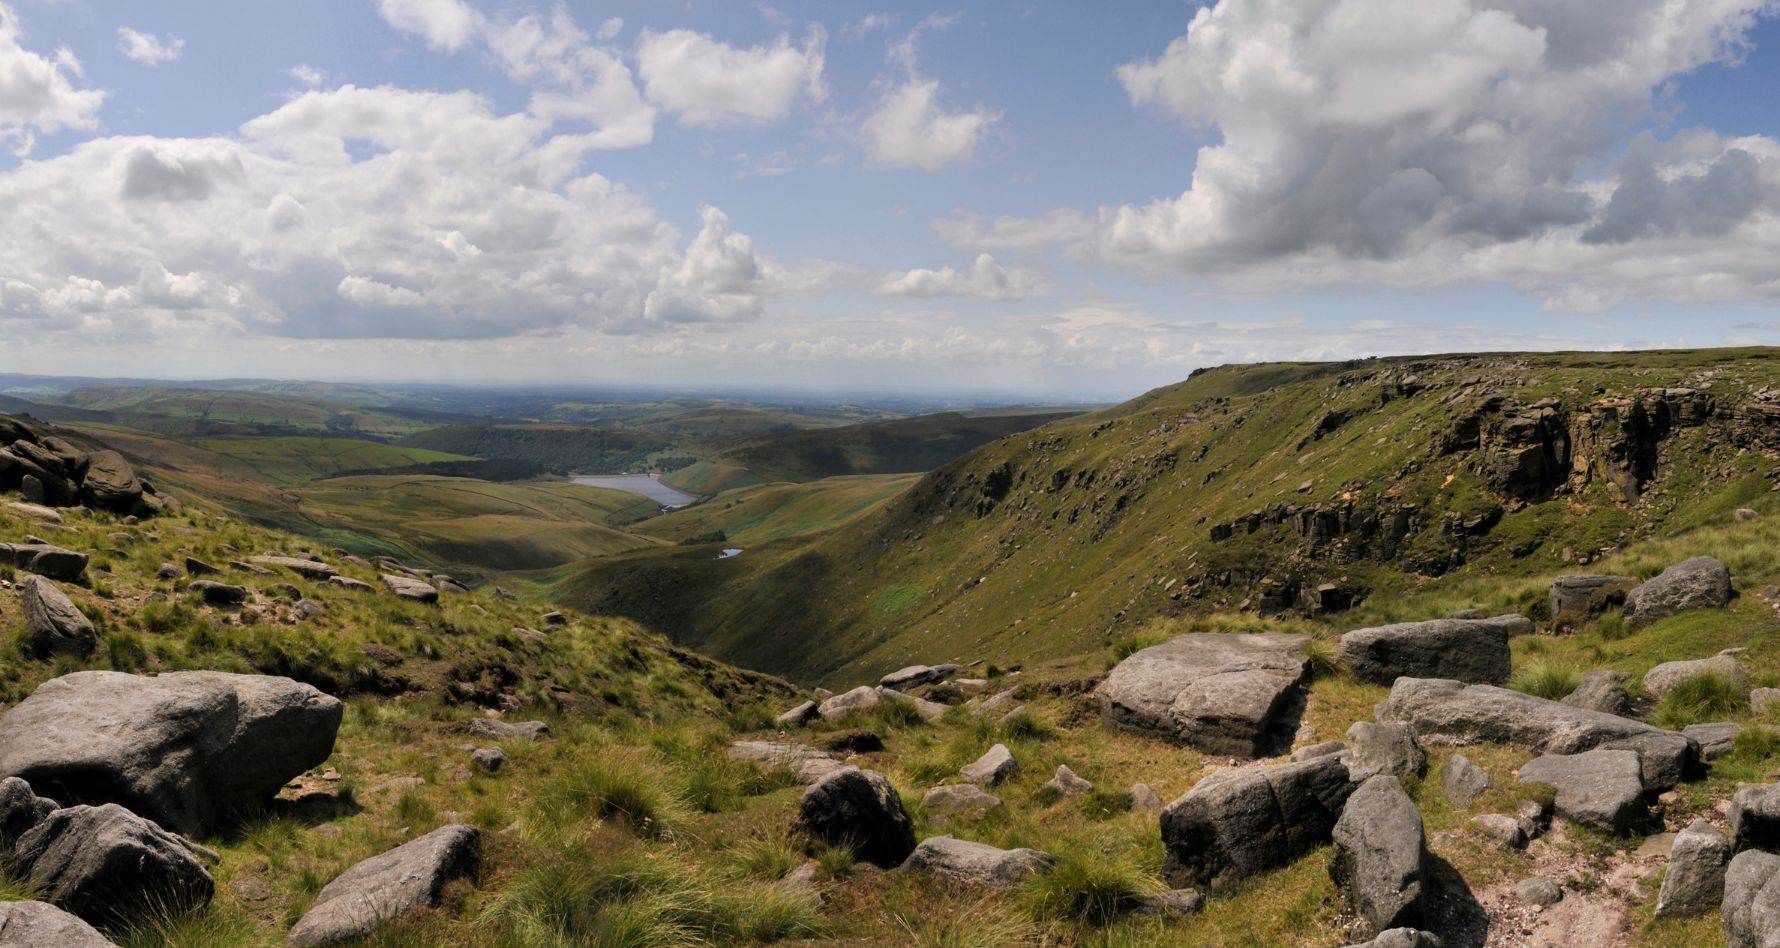 A Peak District view over the valley of the River Kinder, past Mermaid's Pool, Kinder Reservoir and onwards to Greater Manchester